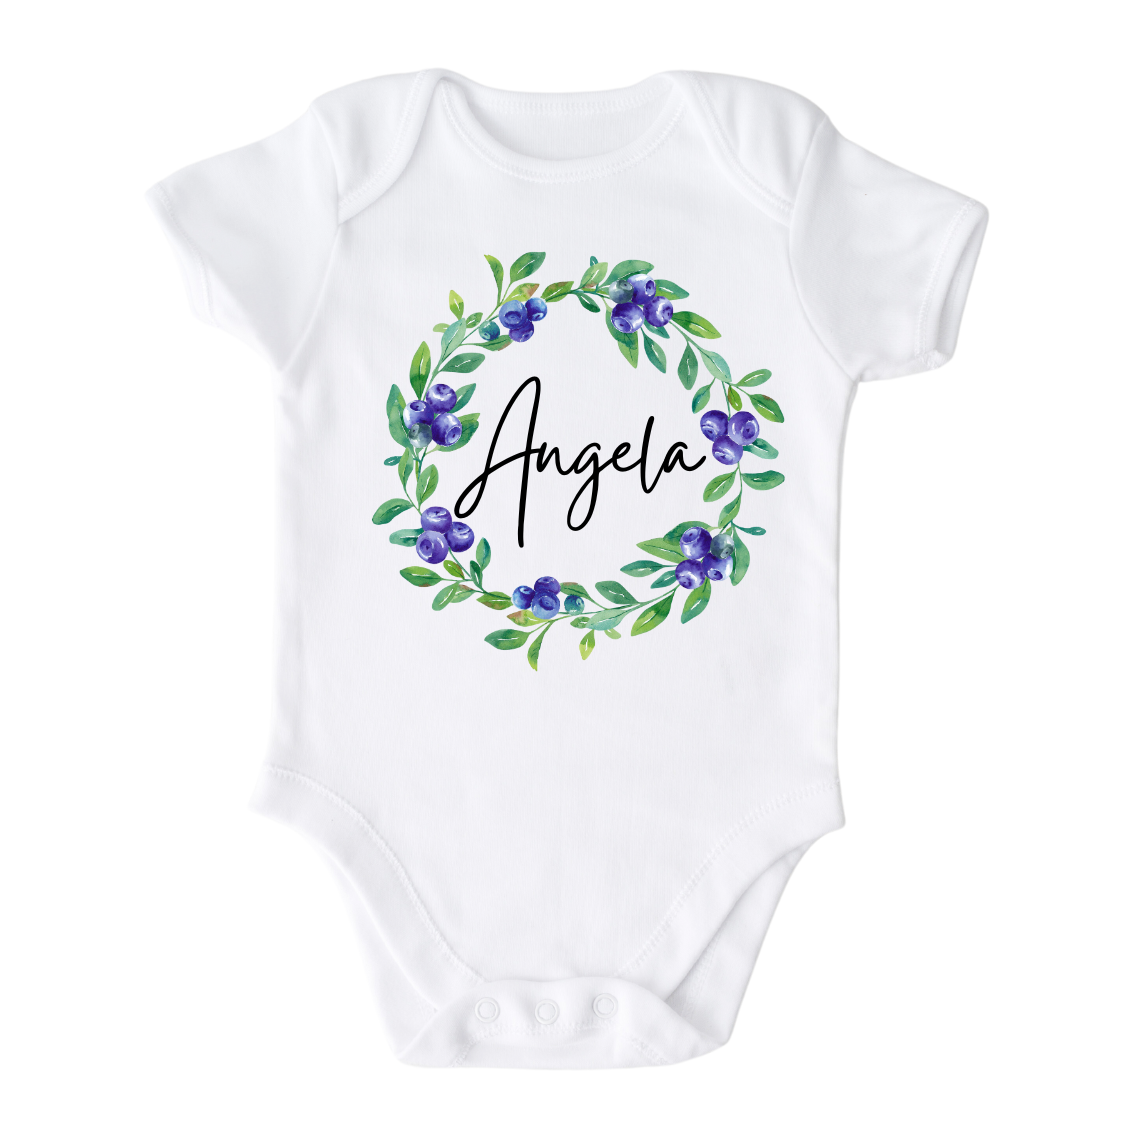 Baby Onesie - Baby Bodysuit - Natural Baby Clothes - Long Sleeve Baby Onsie with a cute blueberry floral wreath design, customizable with names.